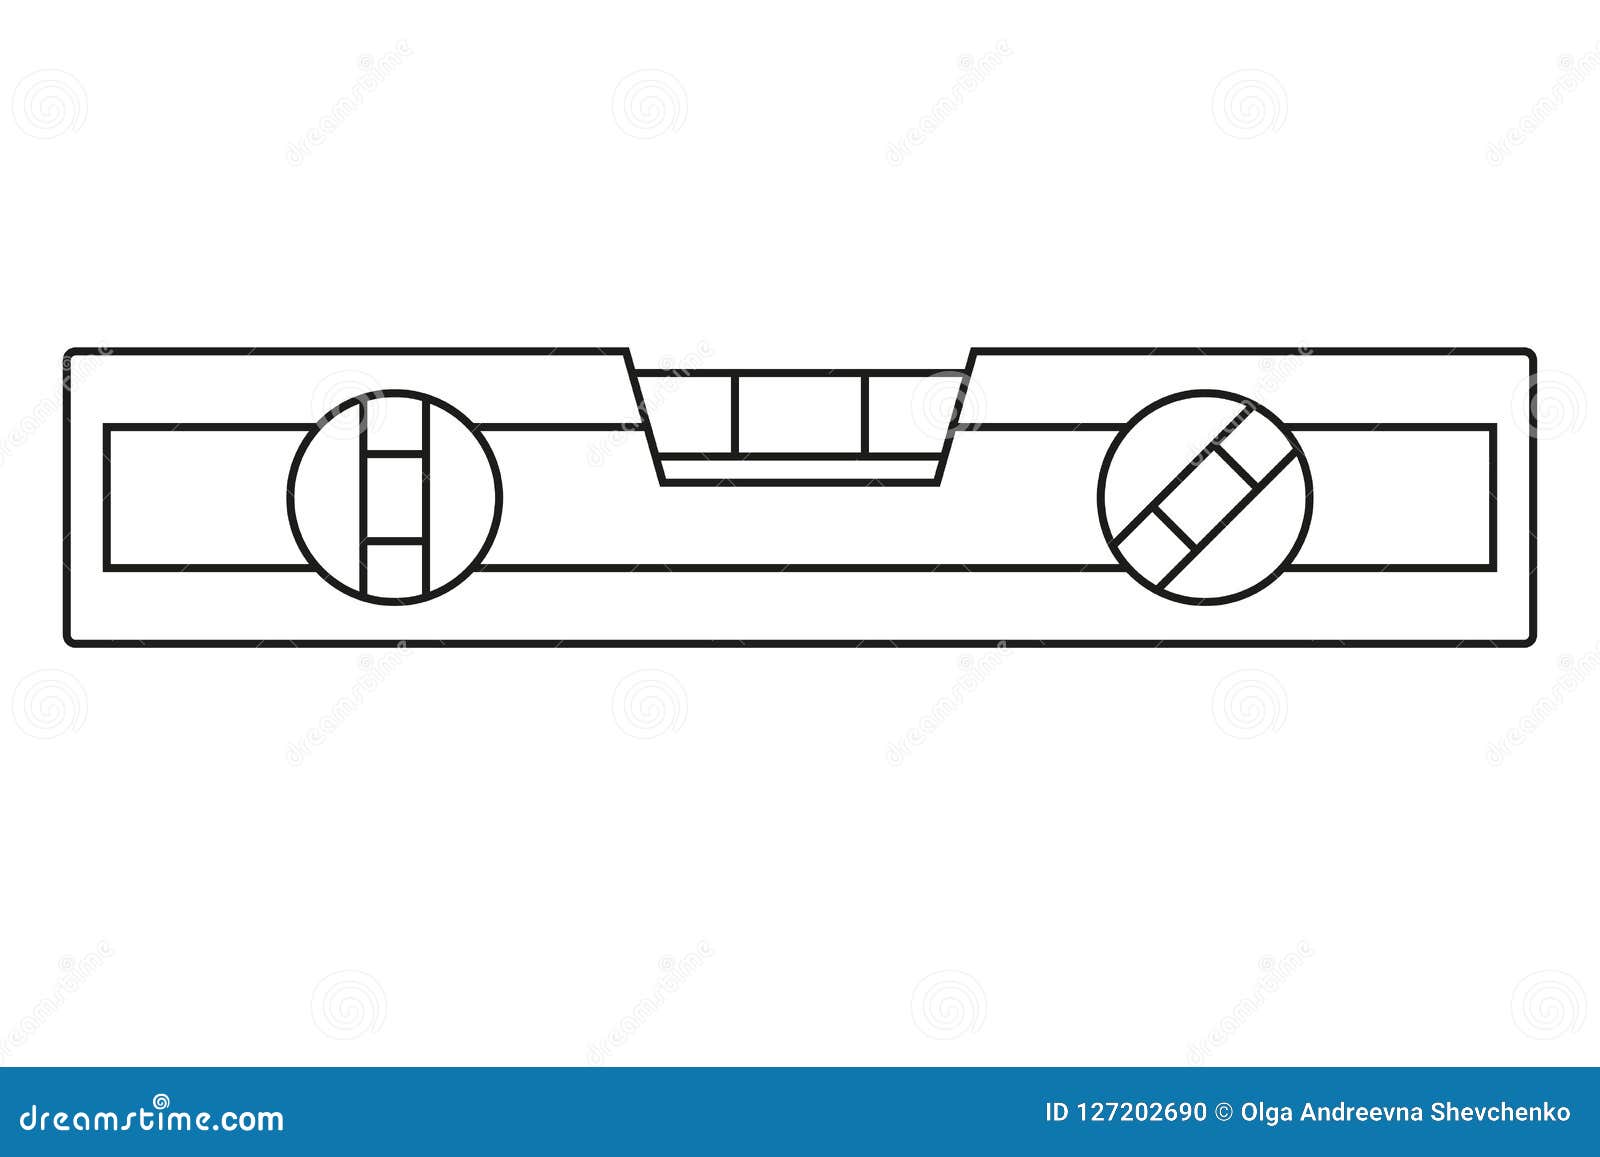 Line Art Black And White Level Tool Stock Vector Illustration Of Construction Industrial